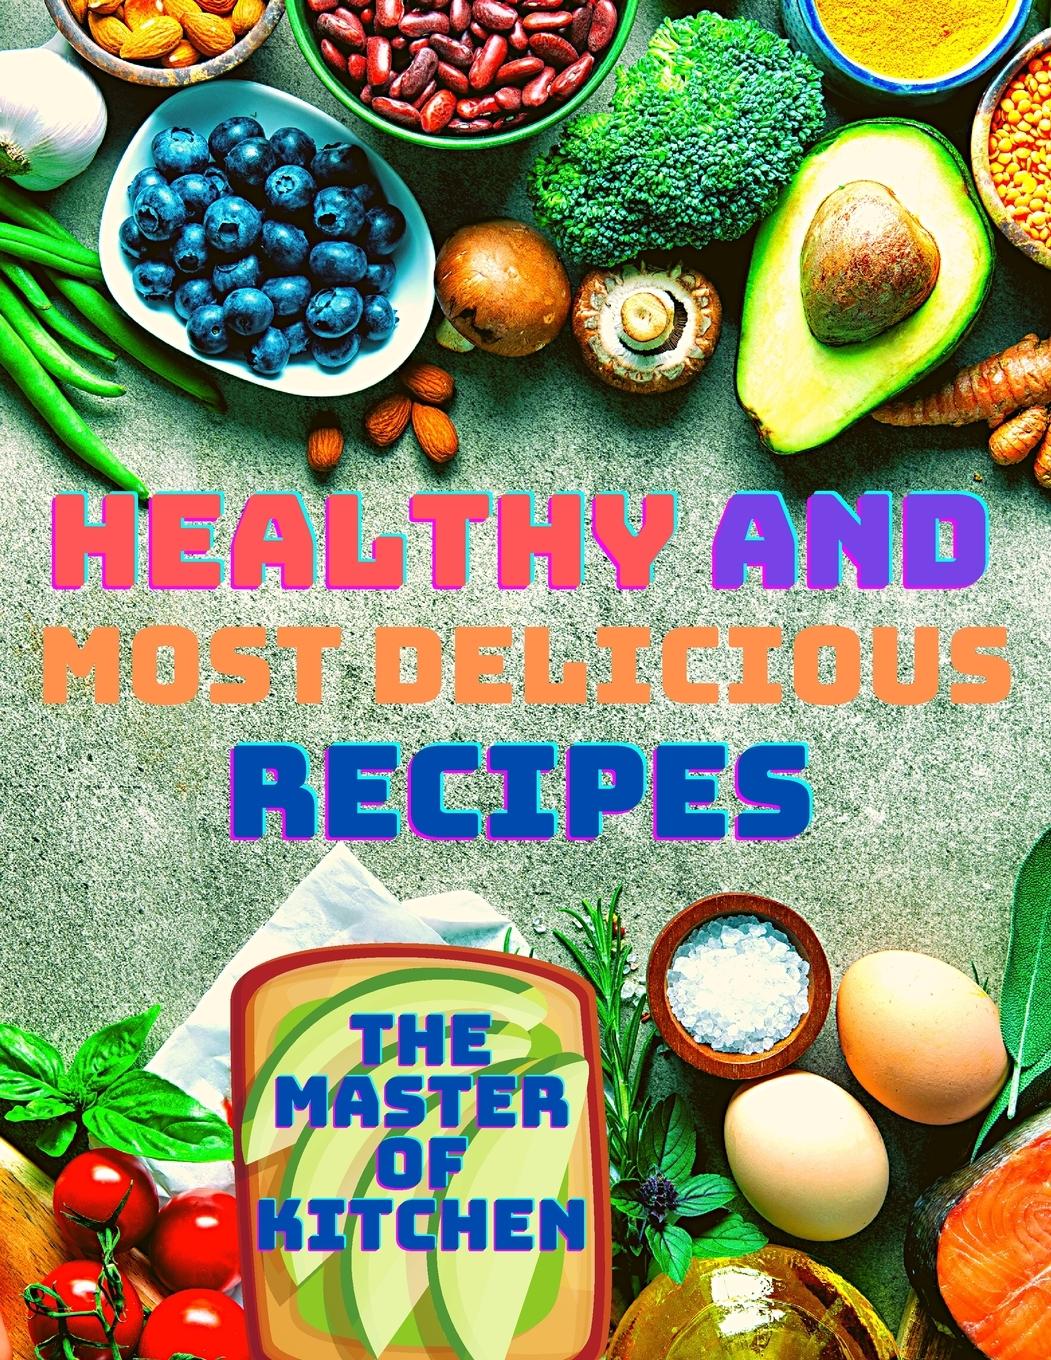 Healthy and Most Delicious Recipes | Sorens Books | Taschenbuch | Paperback | Englisch | 2021 | Intell World Publishers | EAN 9781803896106 - Sorens Books